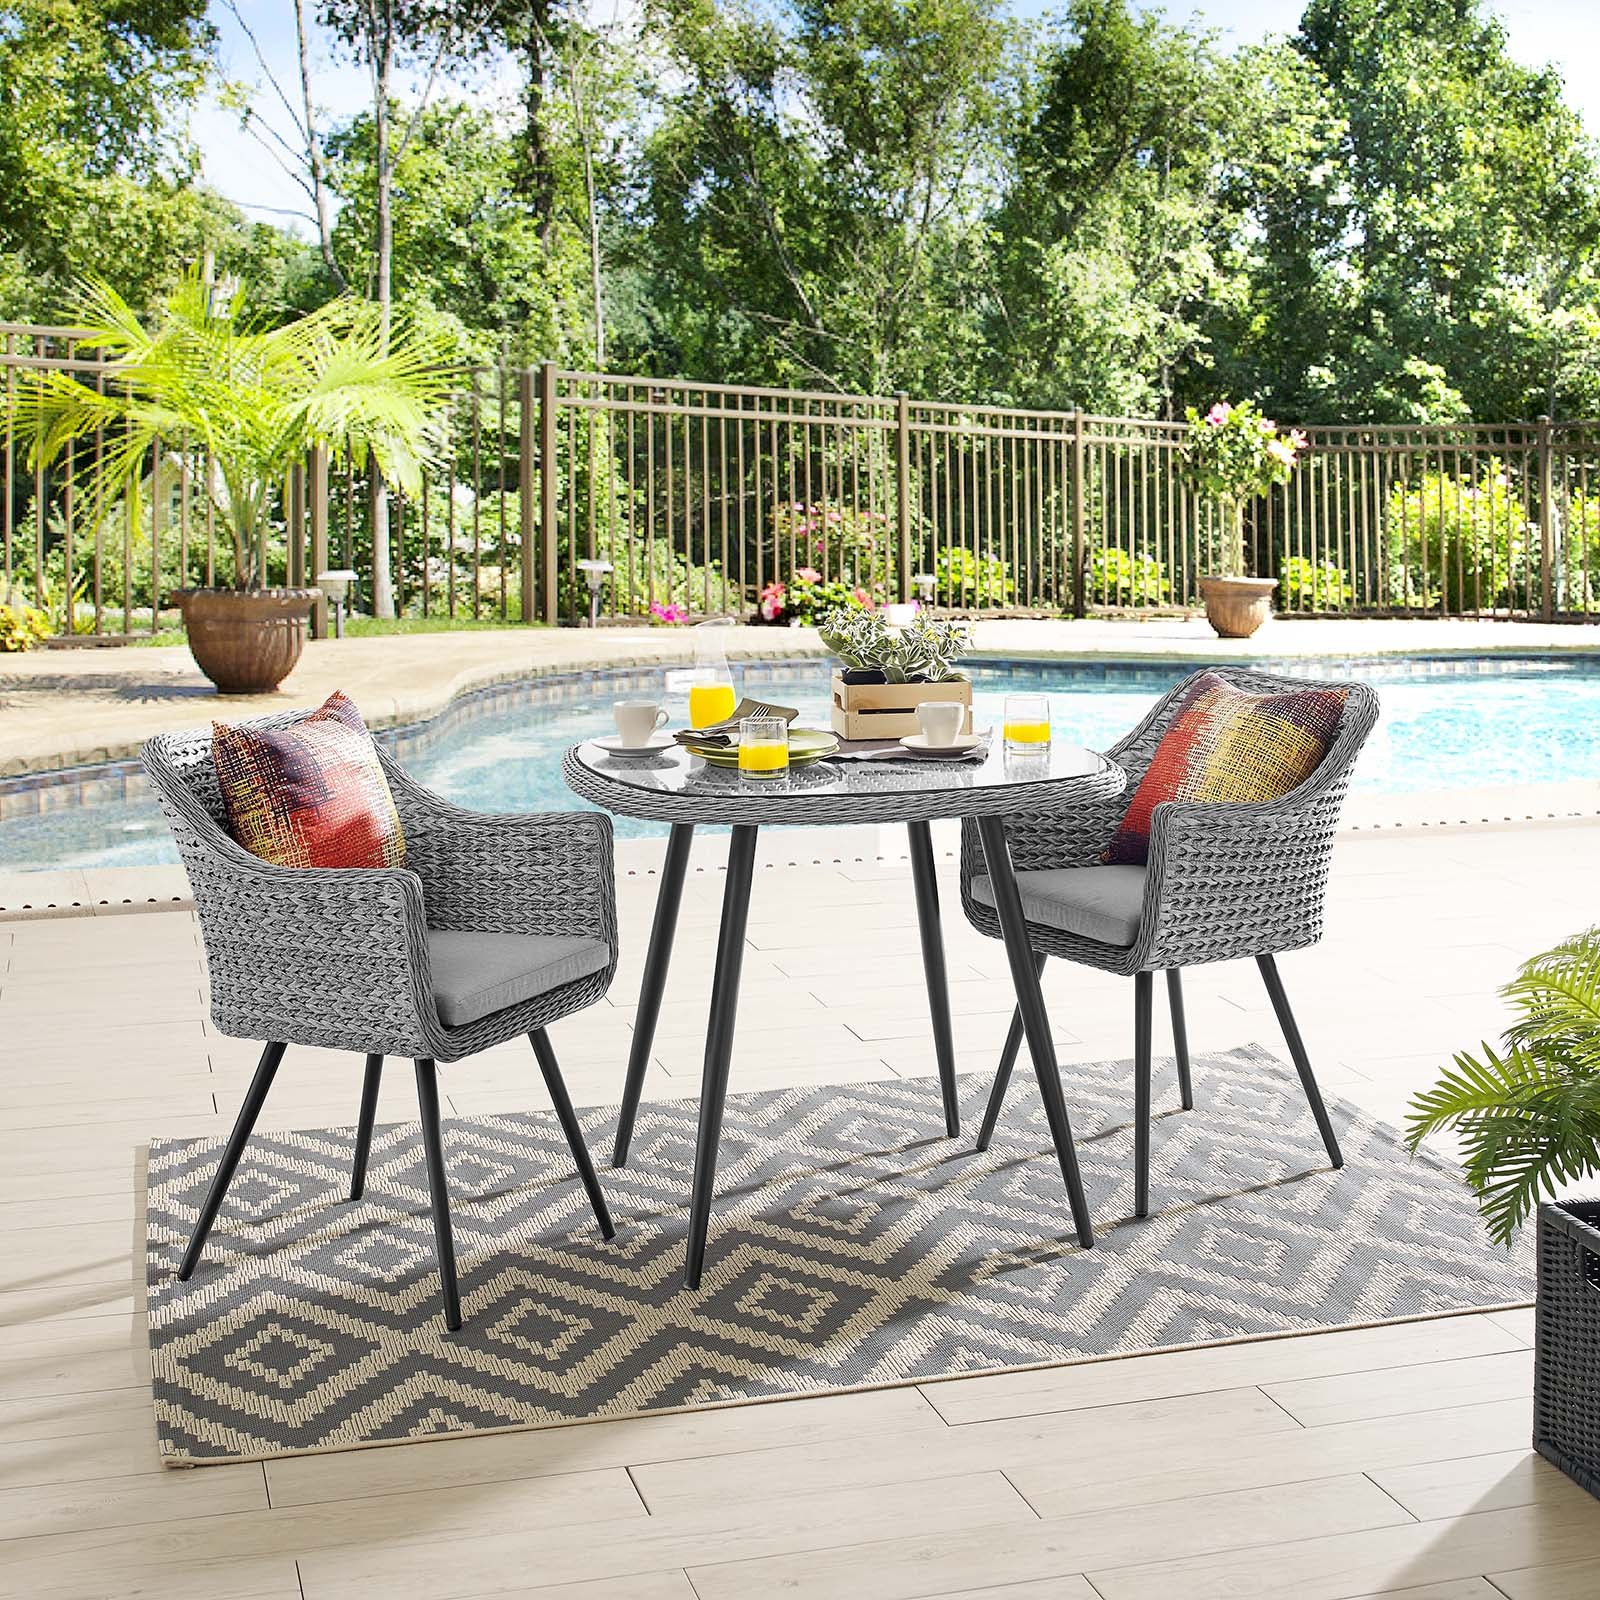 Endeavor 3 Piece Outdoor Patio Wicker Rattan Dining Set - East Shore Modern Home Furnishings